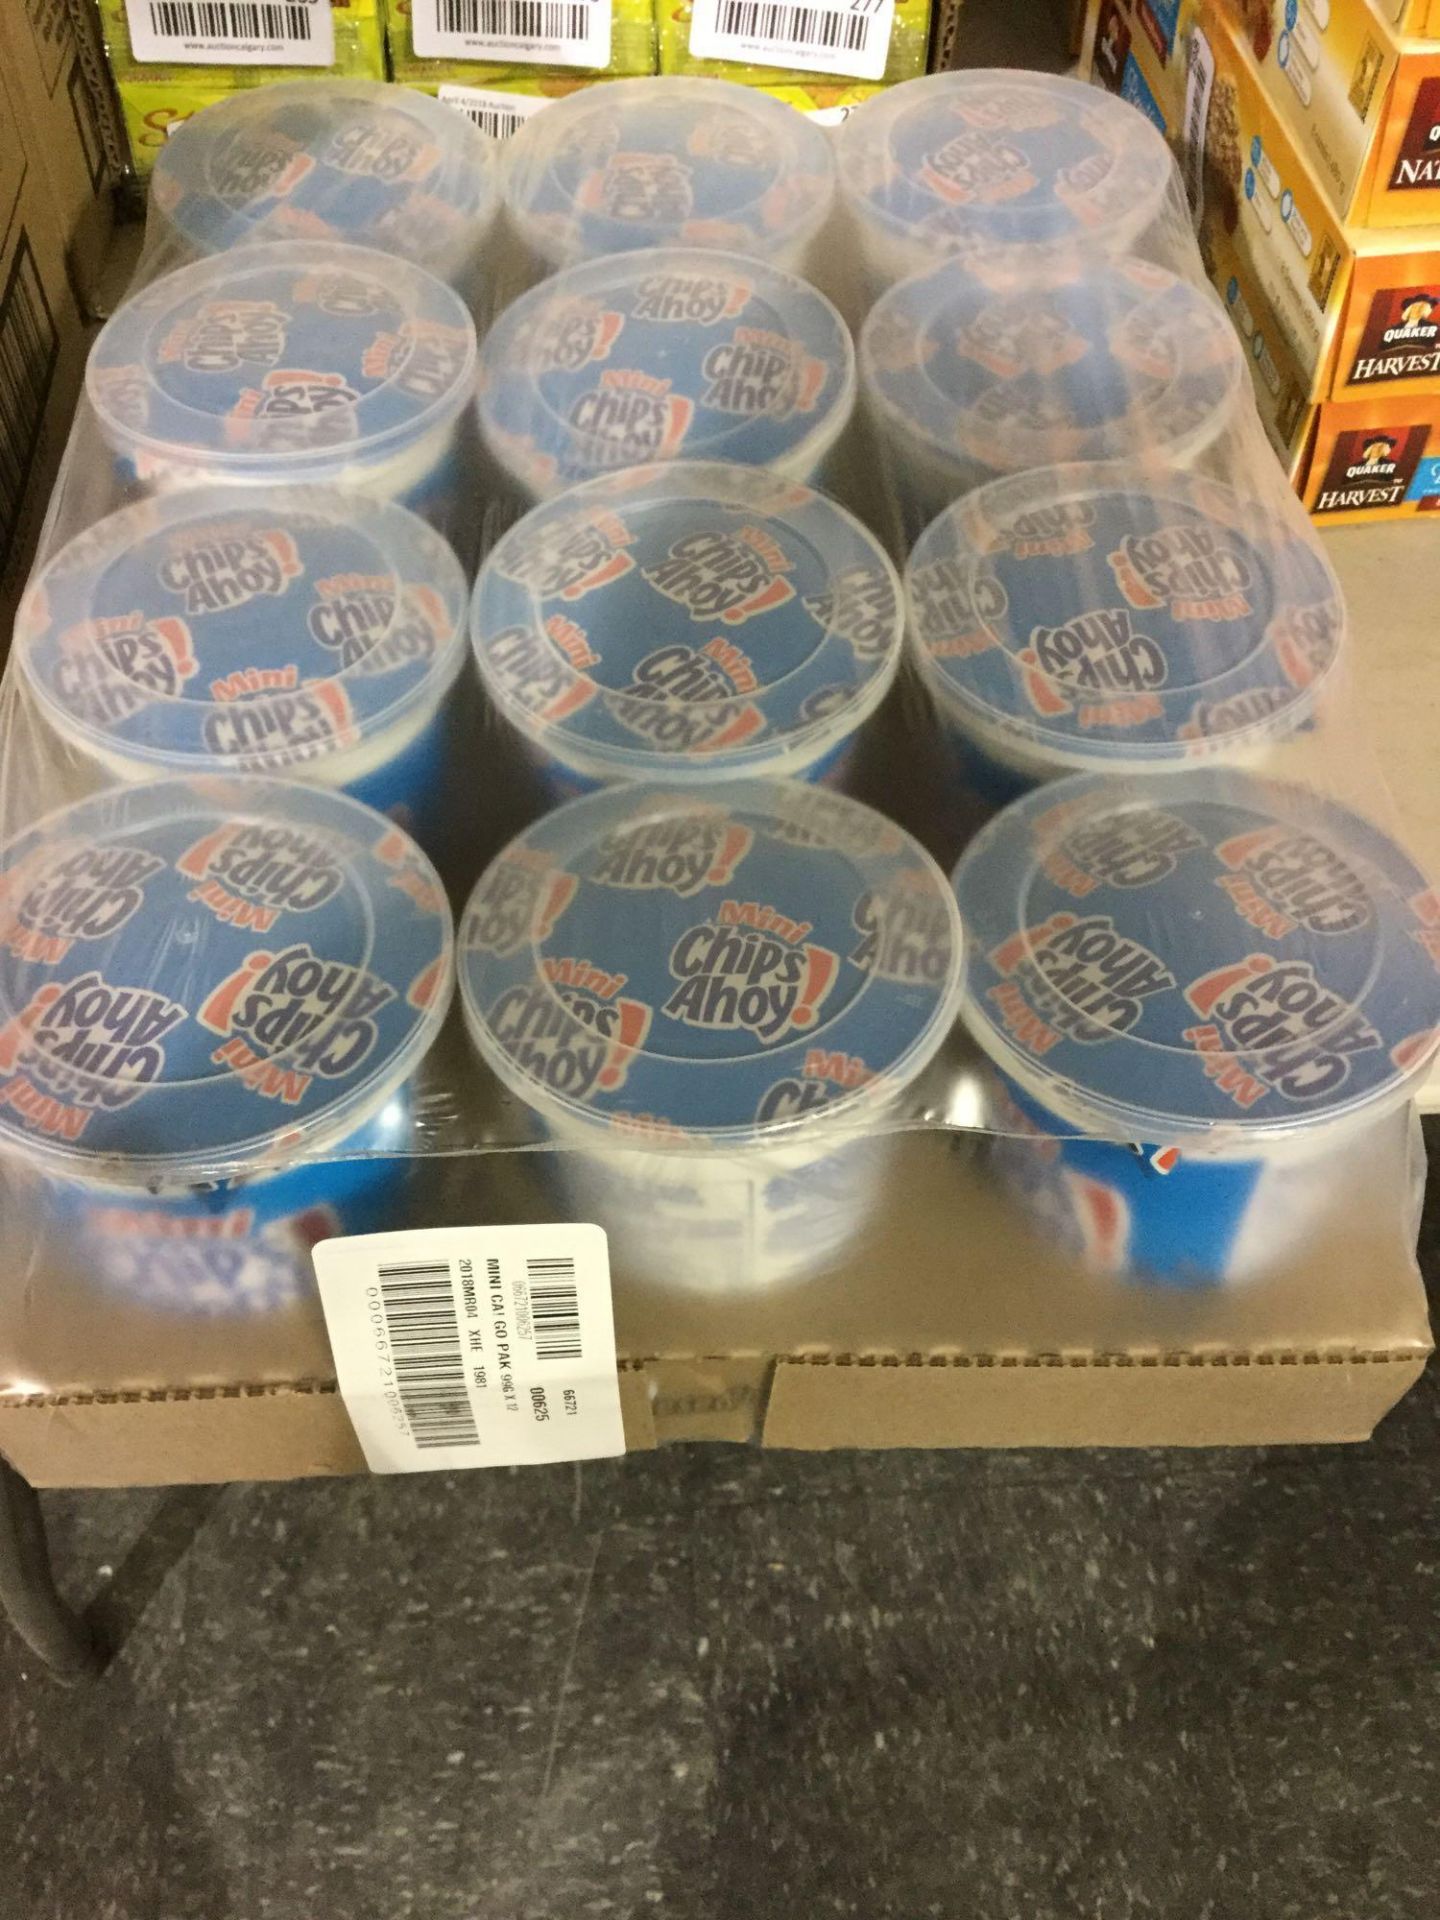 Case of 12 x 99 g Mini Chips Ahoy Cookies